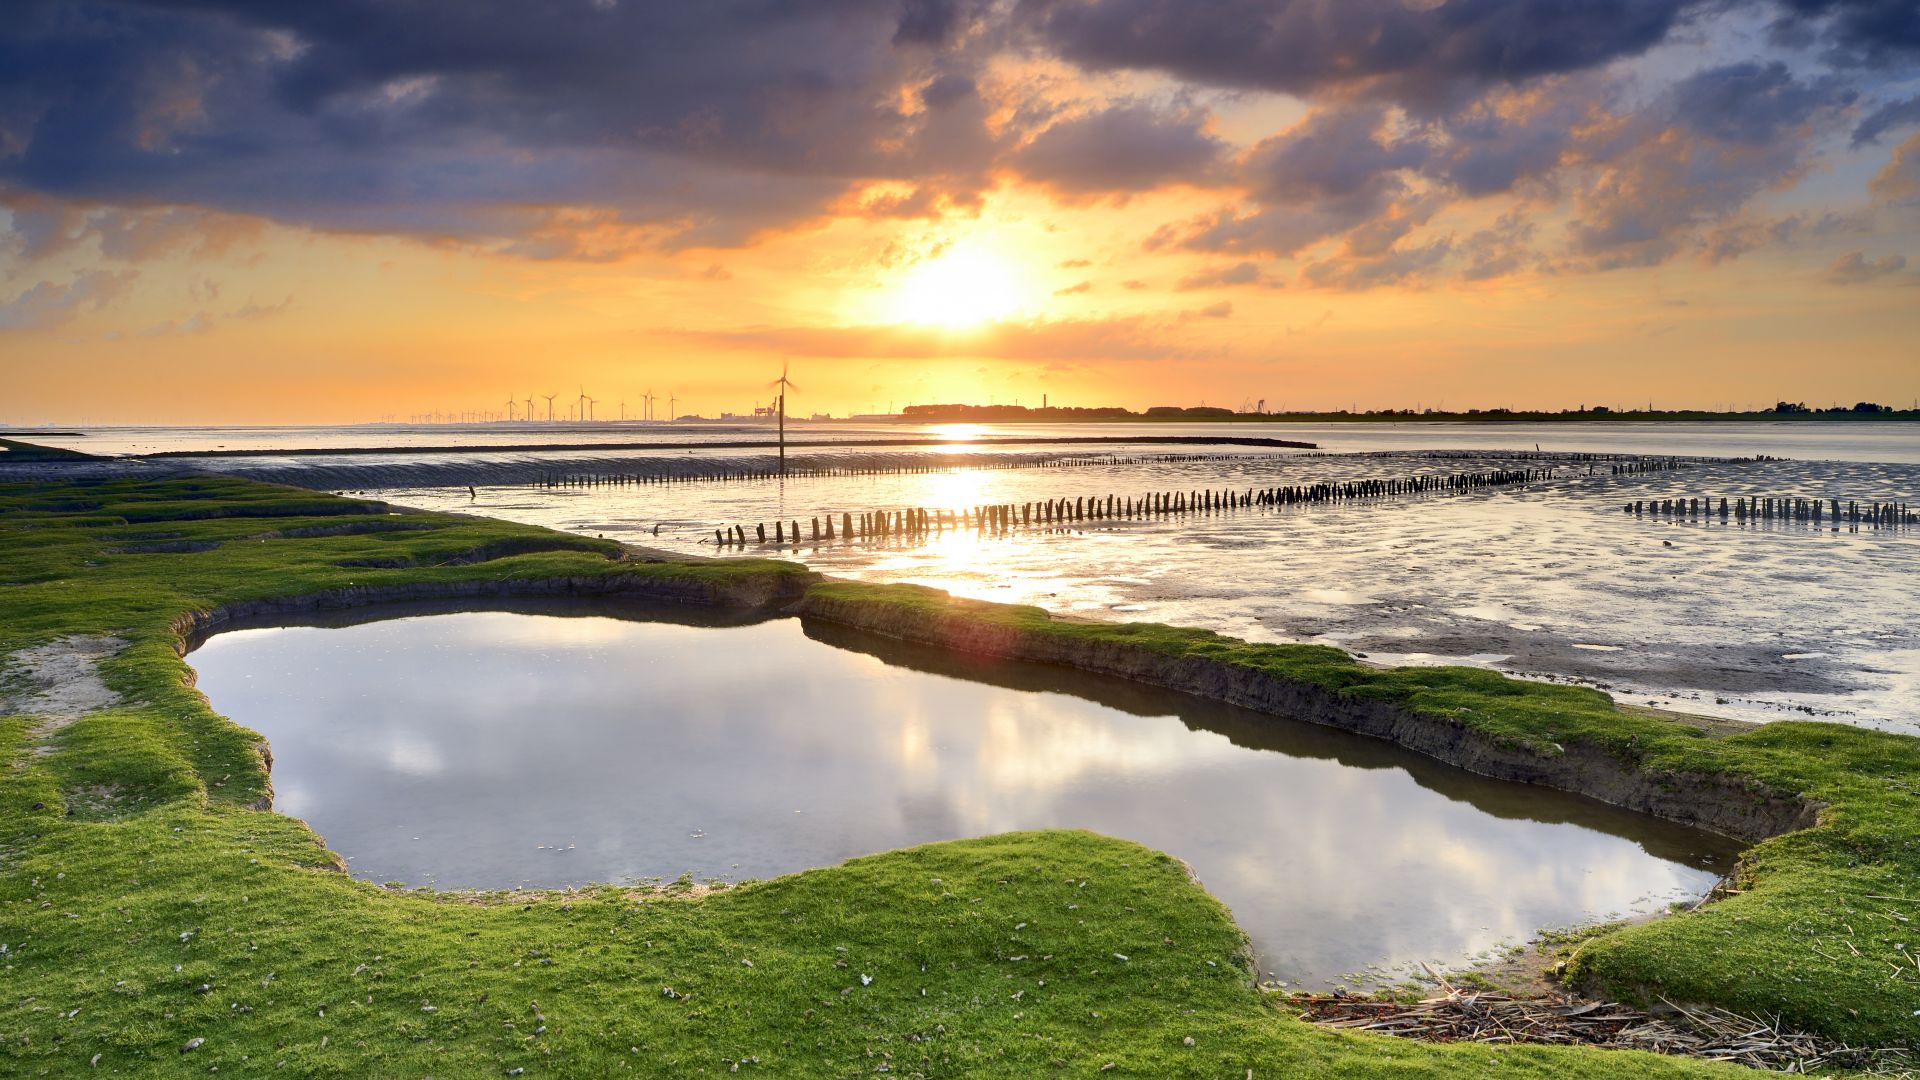 Dollern: View of the sunny mudflats in the Lower Saxony Wadden Sea National Park